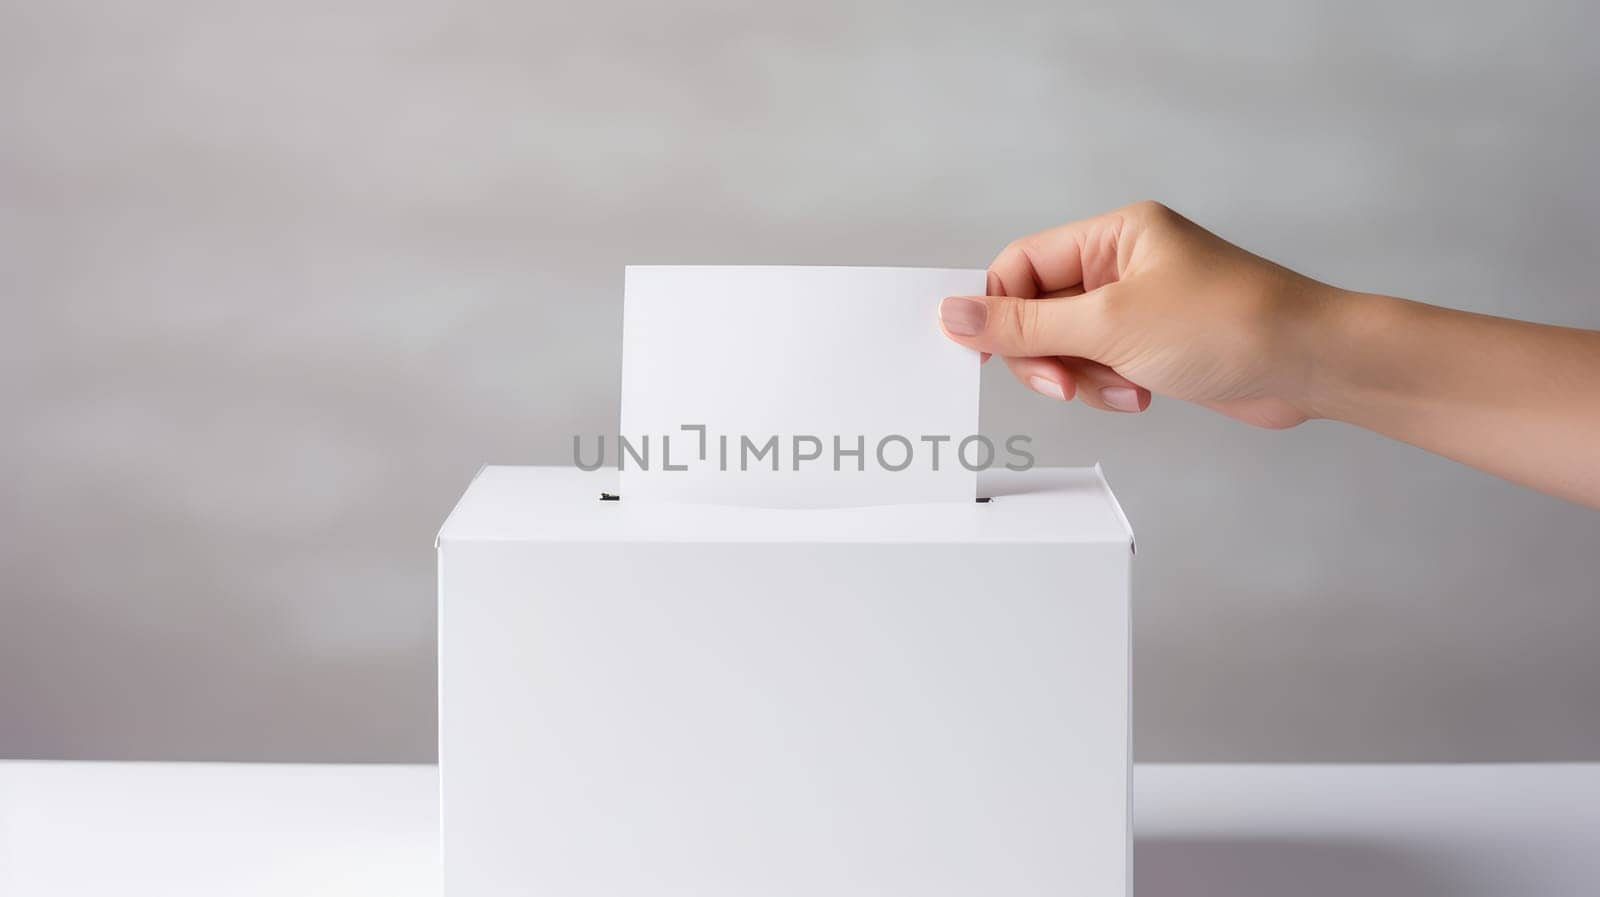 The person places a ballot for the election of president, senator or deputy into a white ballot box. Awareness, decision making, choice